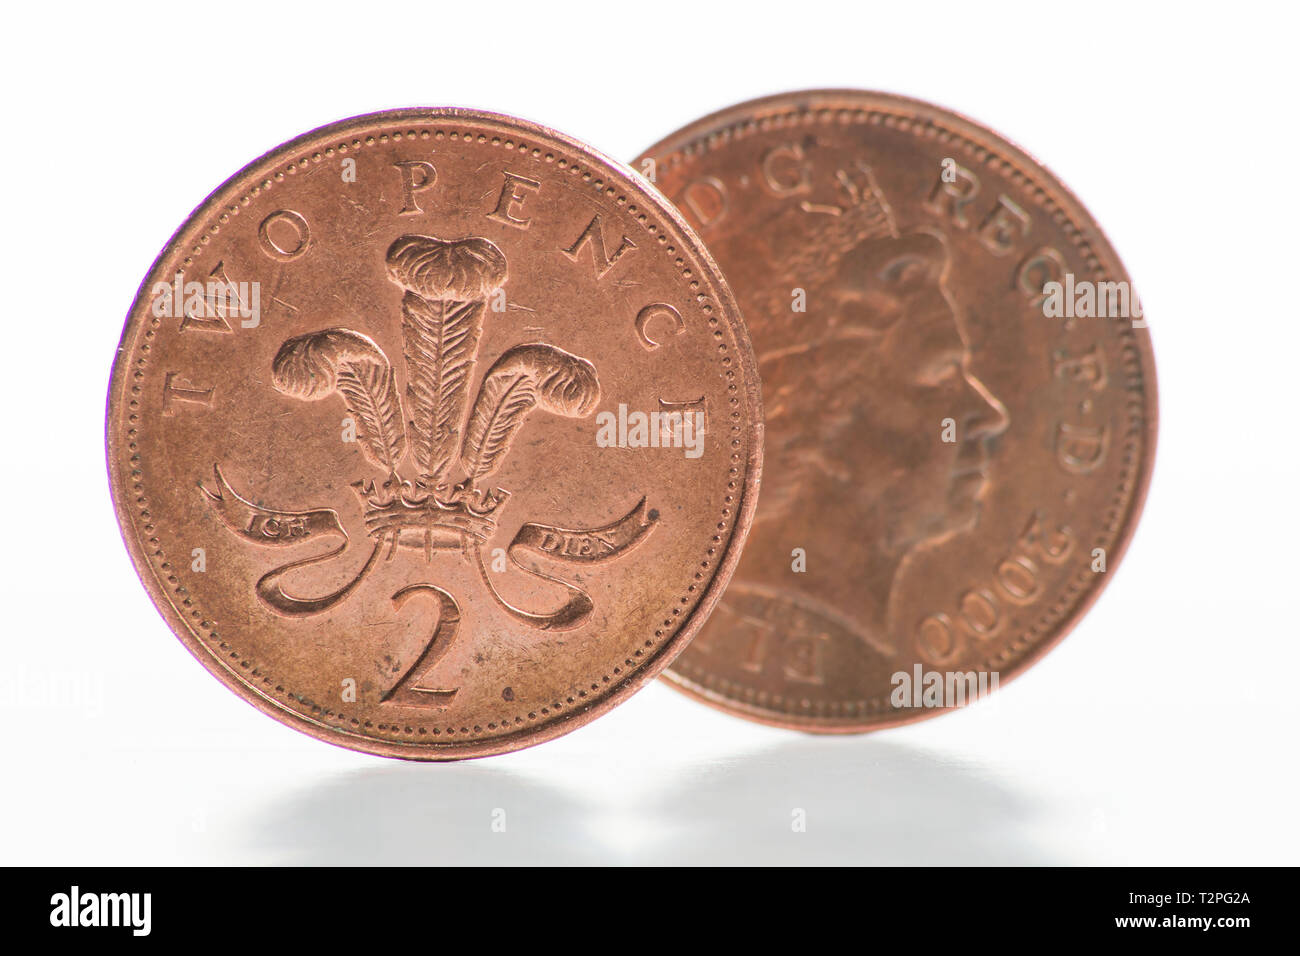 Coins. The Two Pence Piece.  This is the second smallest denomination in the Sterling currency. Stock Photo